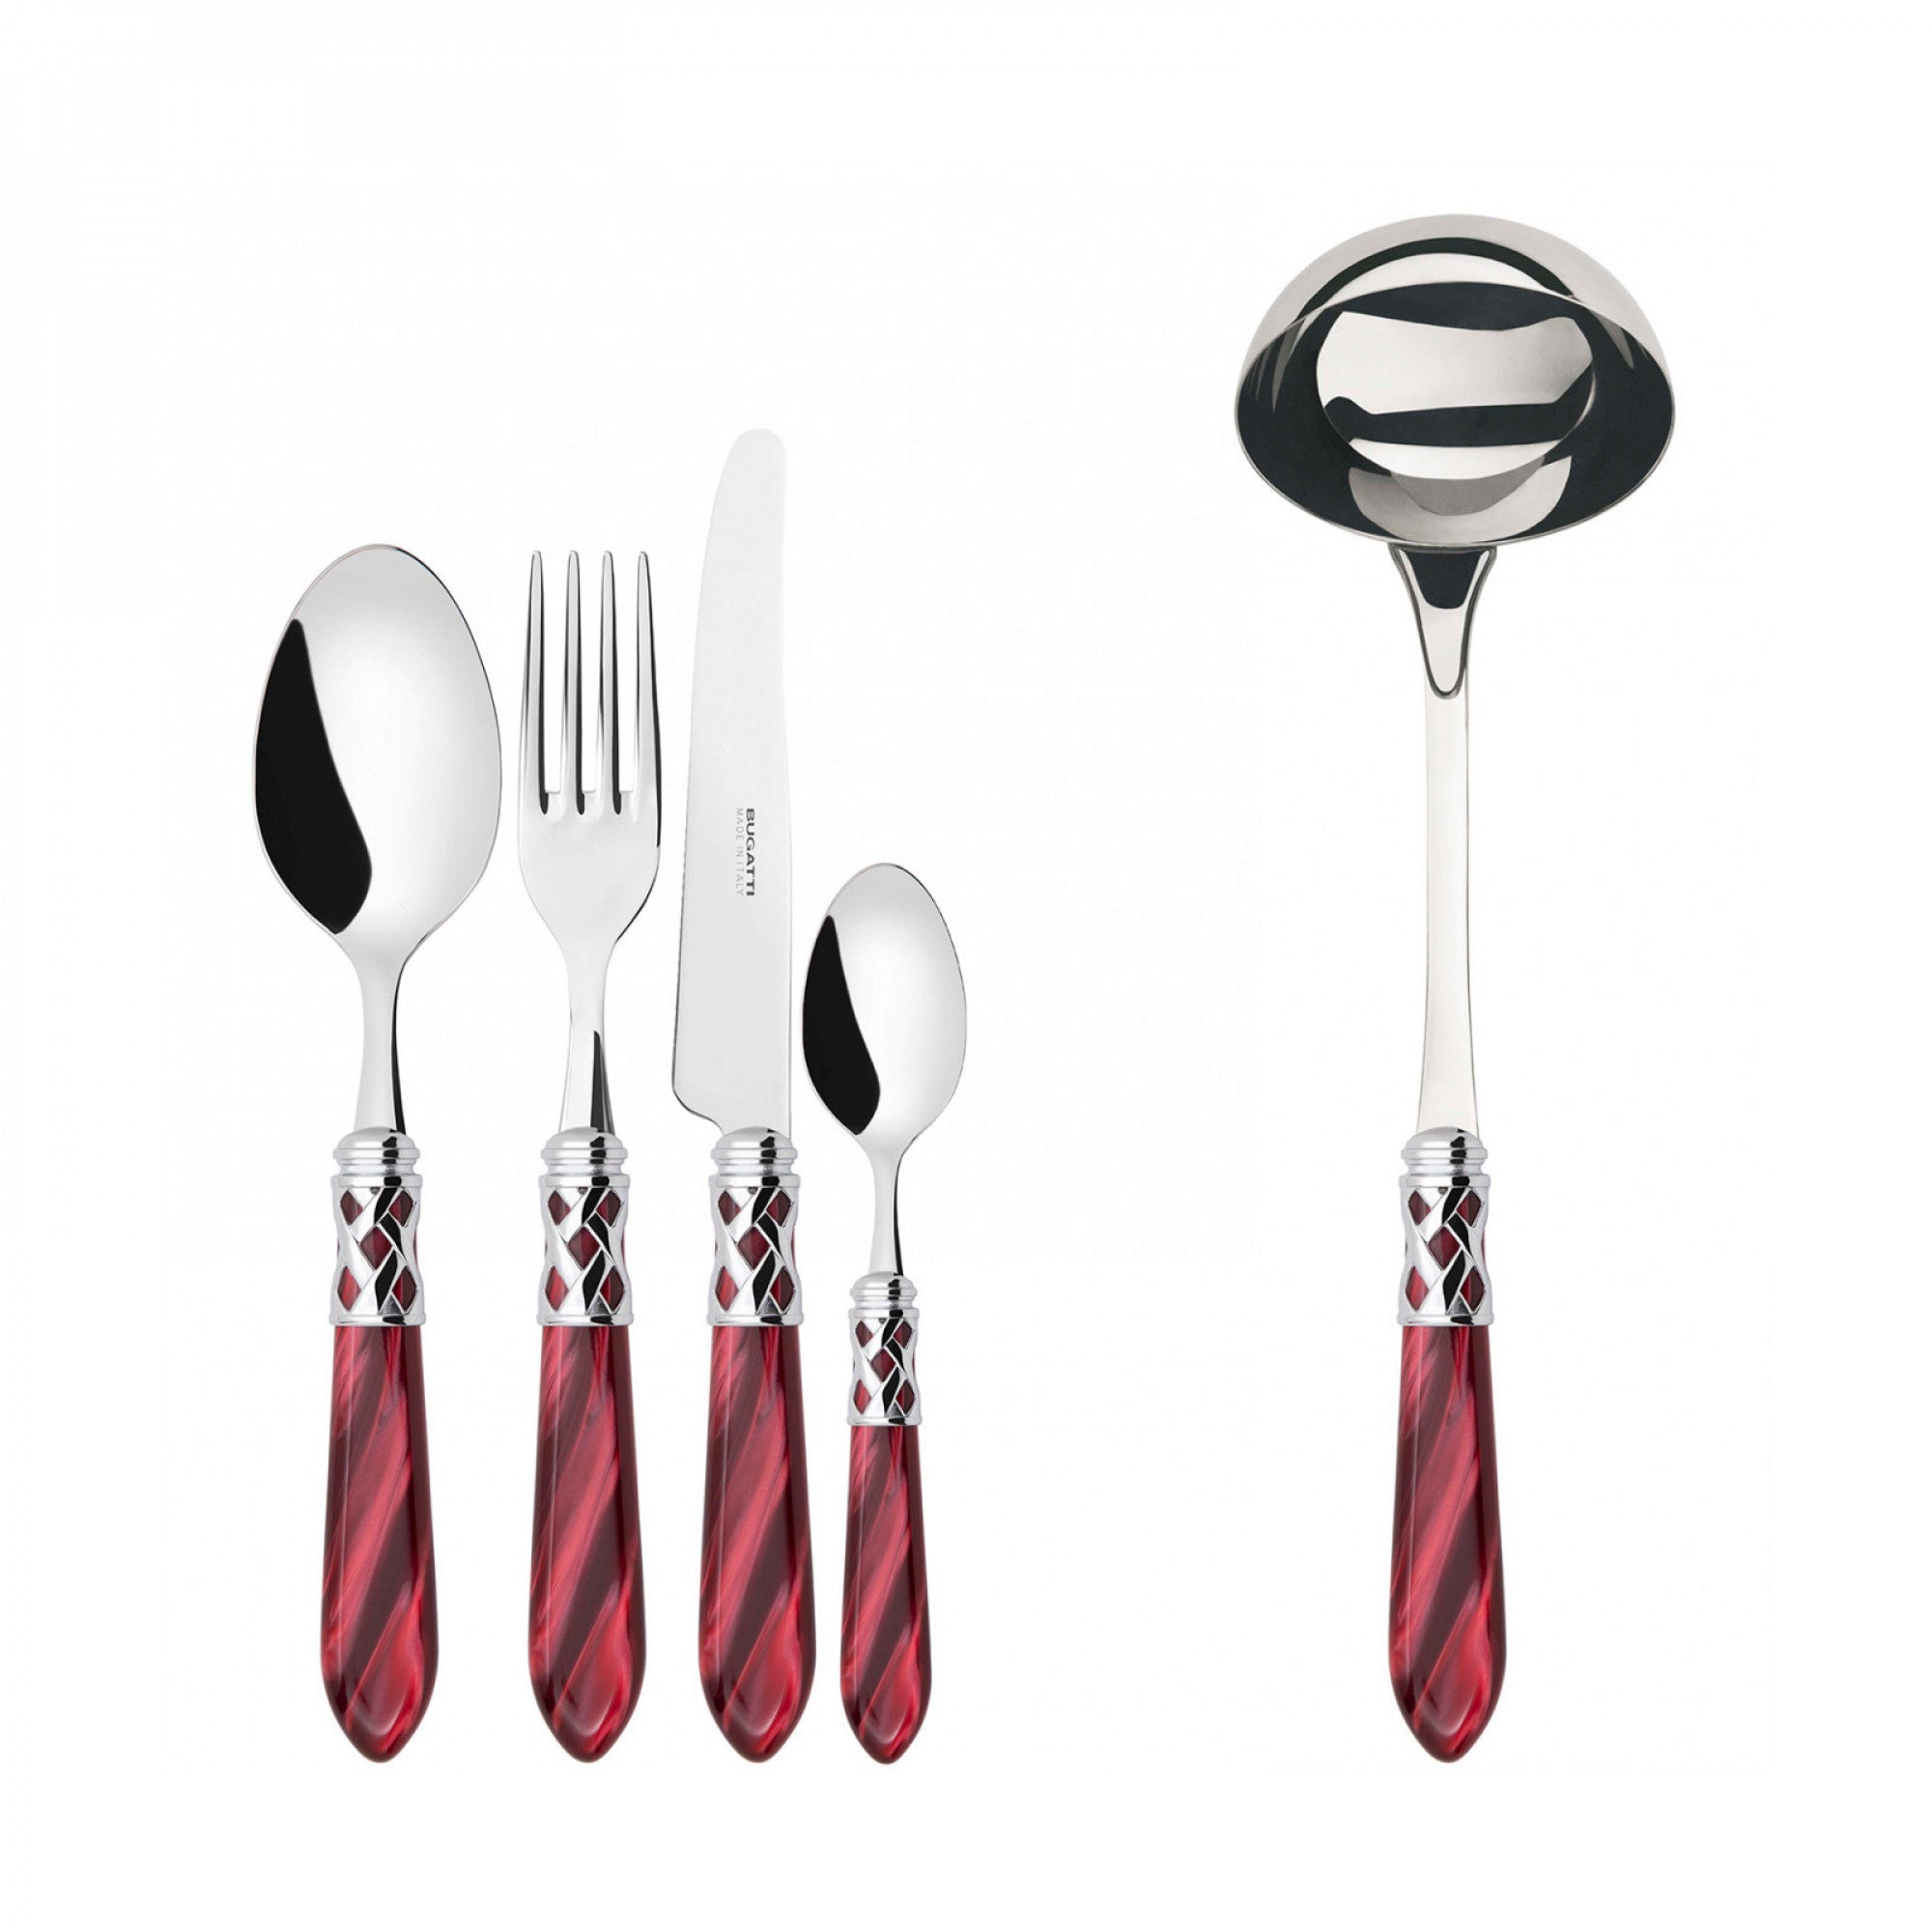 BUGATTI, Aladdin, 49-Piece Cutlery Set in Stainless Steel, Chromed Ring and Bordeaux Silk Effect Handle. Set for 12 people: 12 spoons, 12 forks, 12 knives, 12 teaspoons and 1 ladle